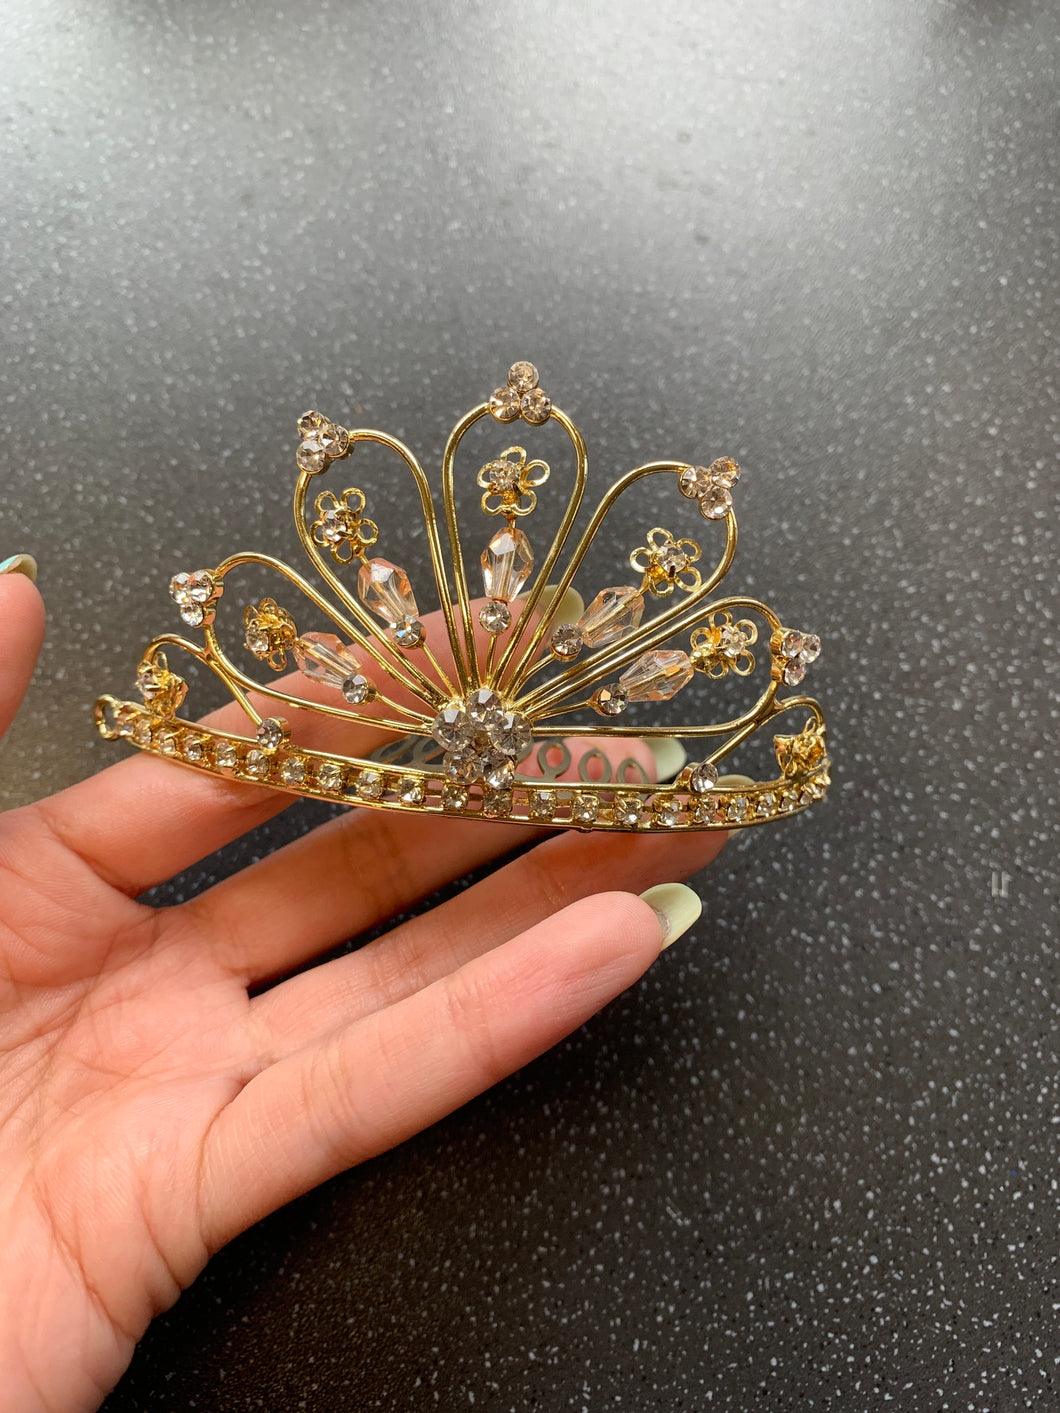 Good Luck Crown Tiara Hair Piece Decoration with Grips Gold Rhinestones for Prom, Wedding Quinceanera party Queen Princess Headpiece Jewellery